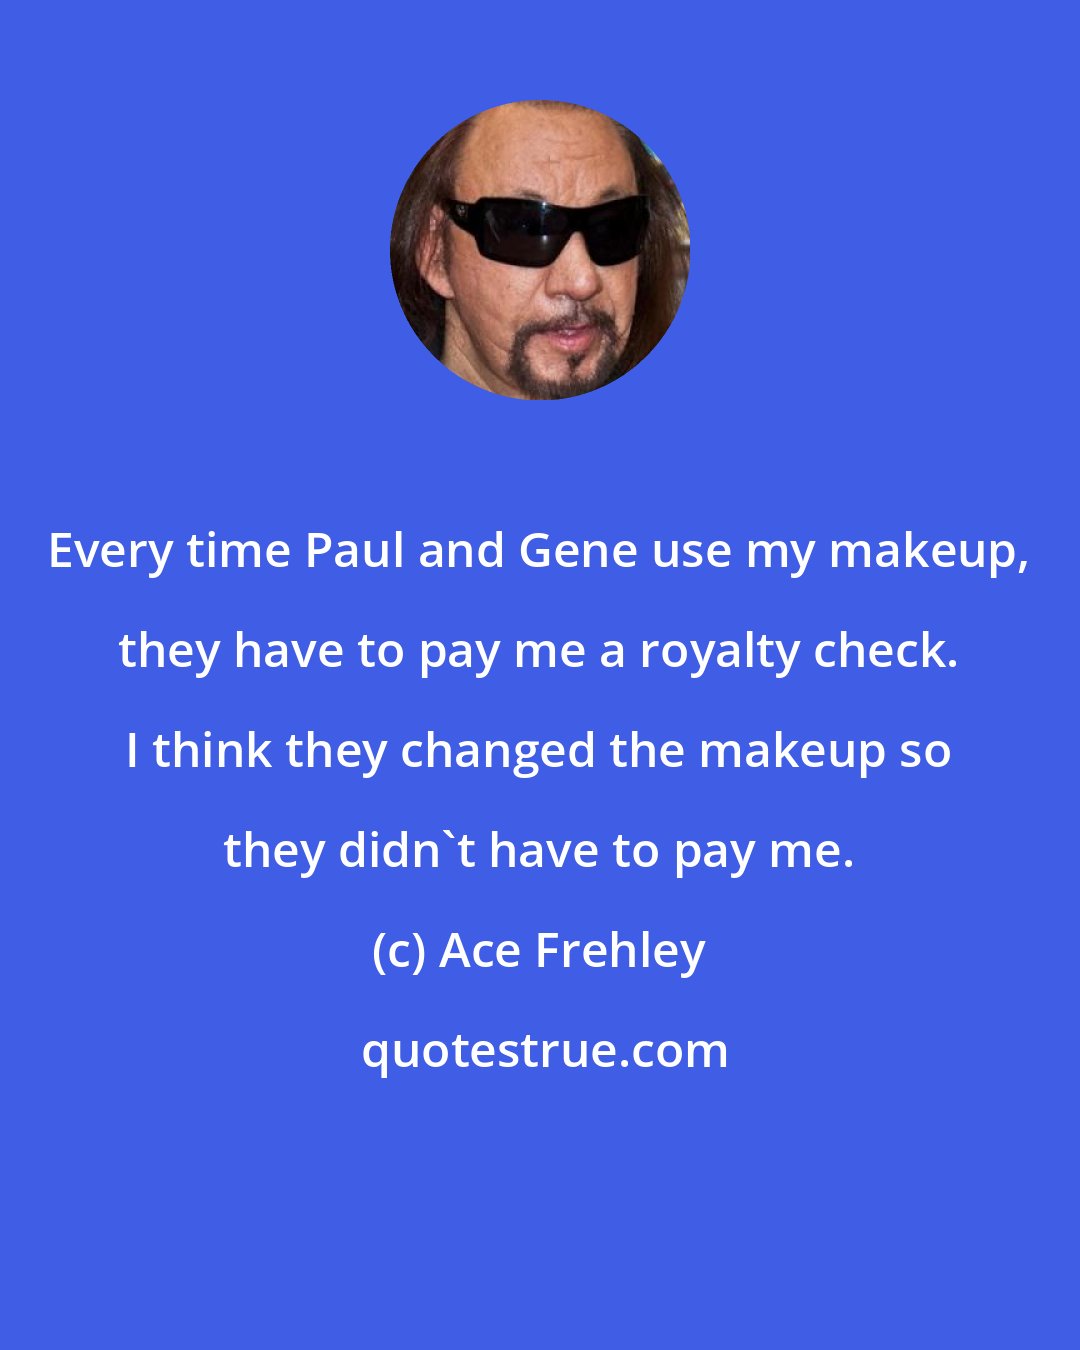 Ace Frehley: Every time Paul and Gene use my makeup, they have to pay me a royalty check. I think they changed the makeup so they didn't have to pay me.